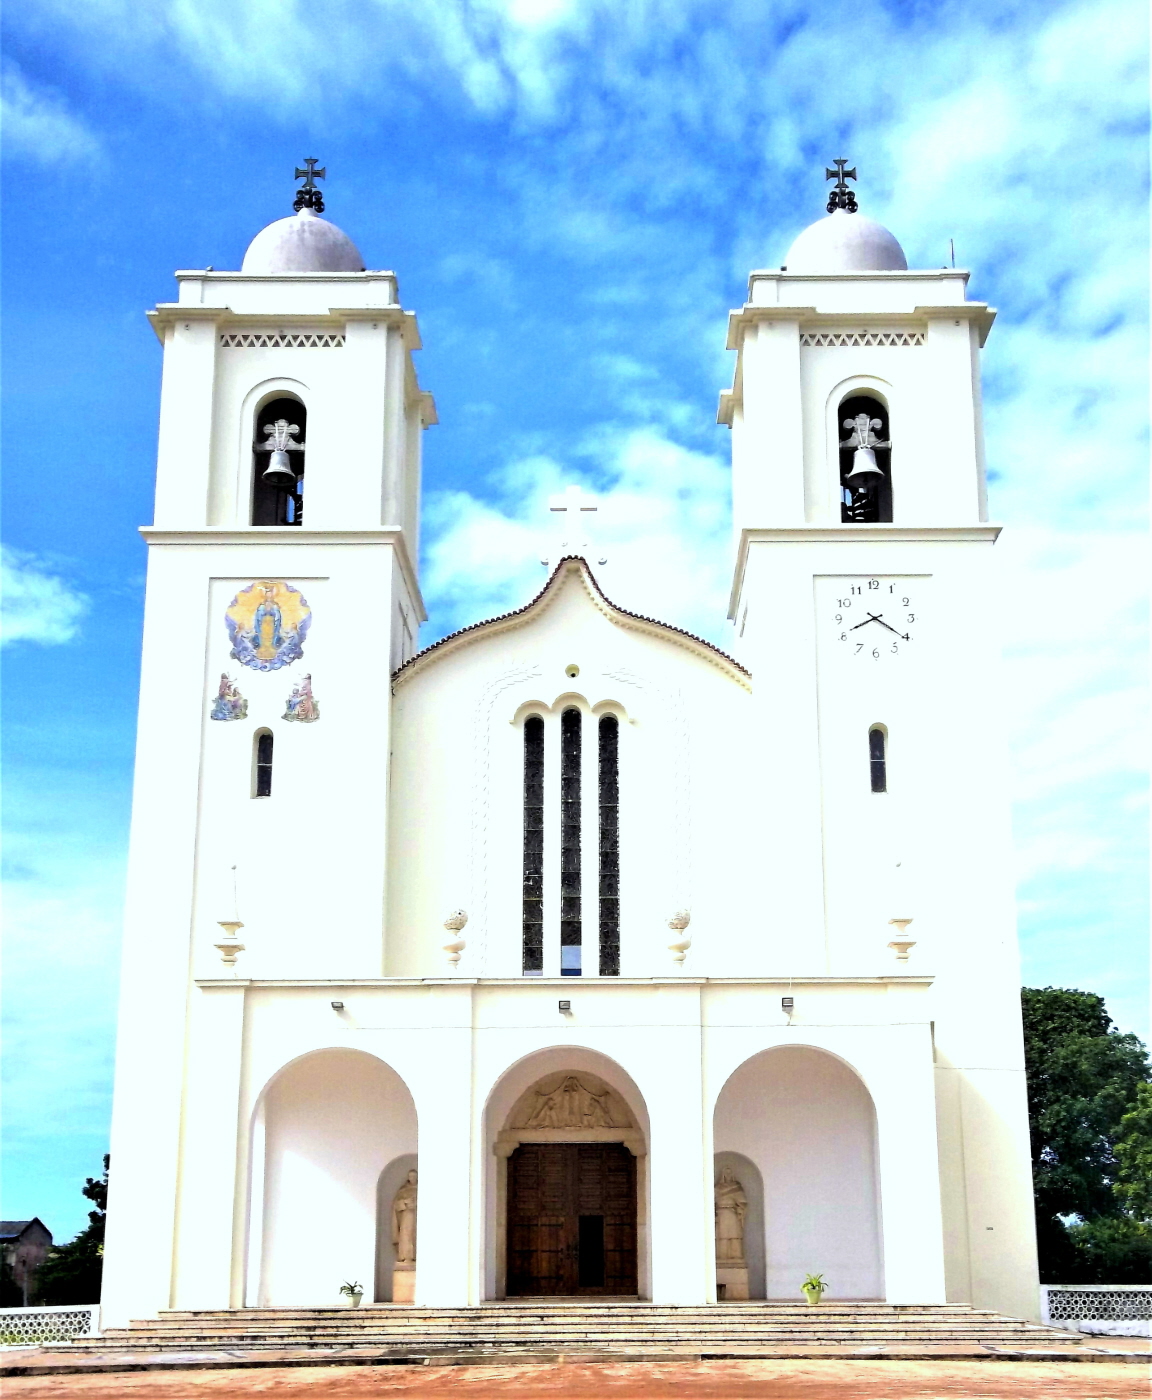 Religions Respect One Another in Nampula -Our Lady of Fatima Cathedral, Mozambique